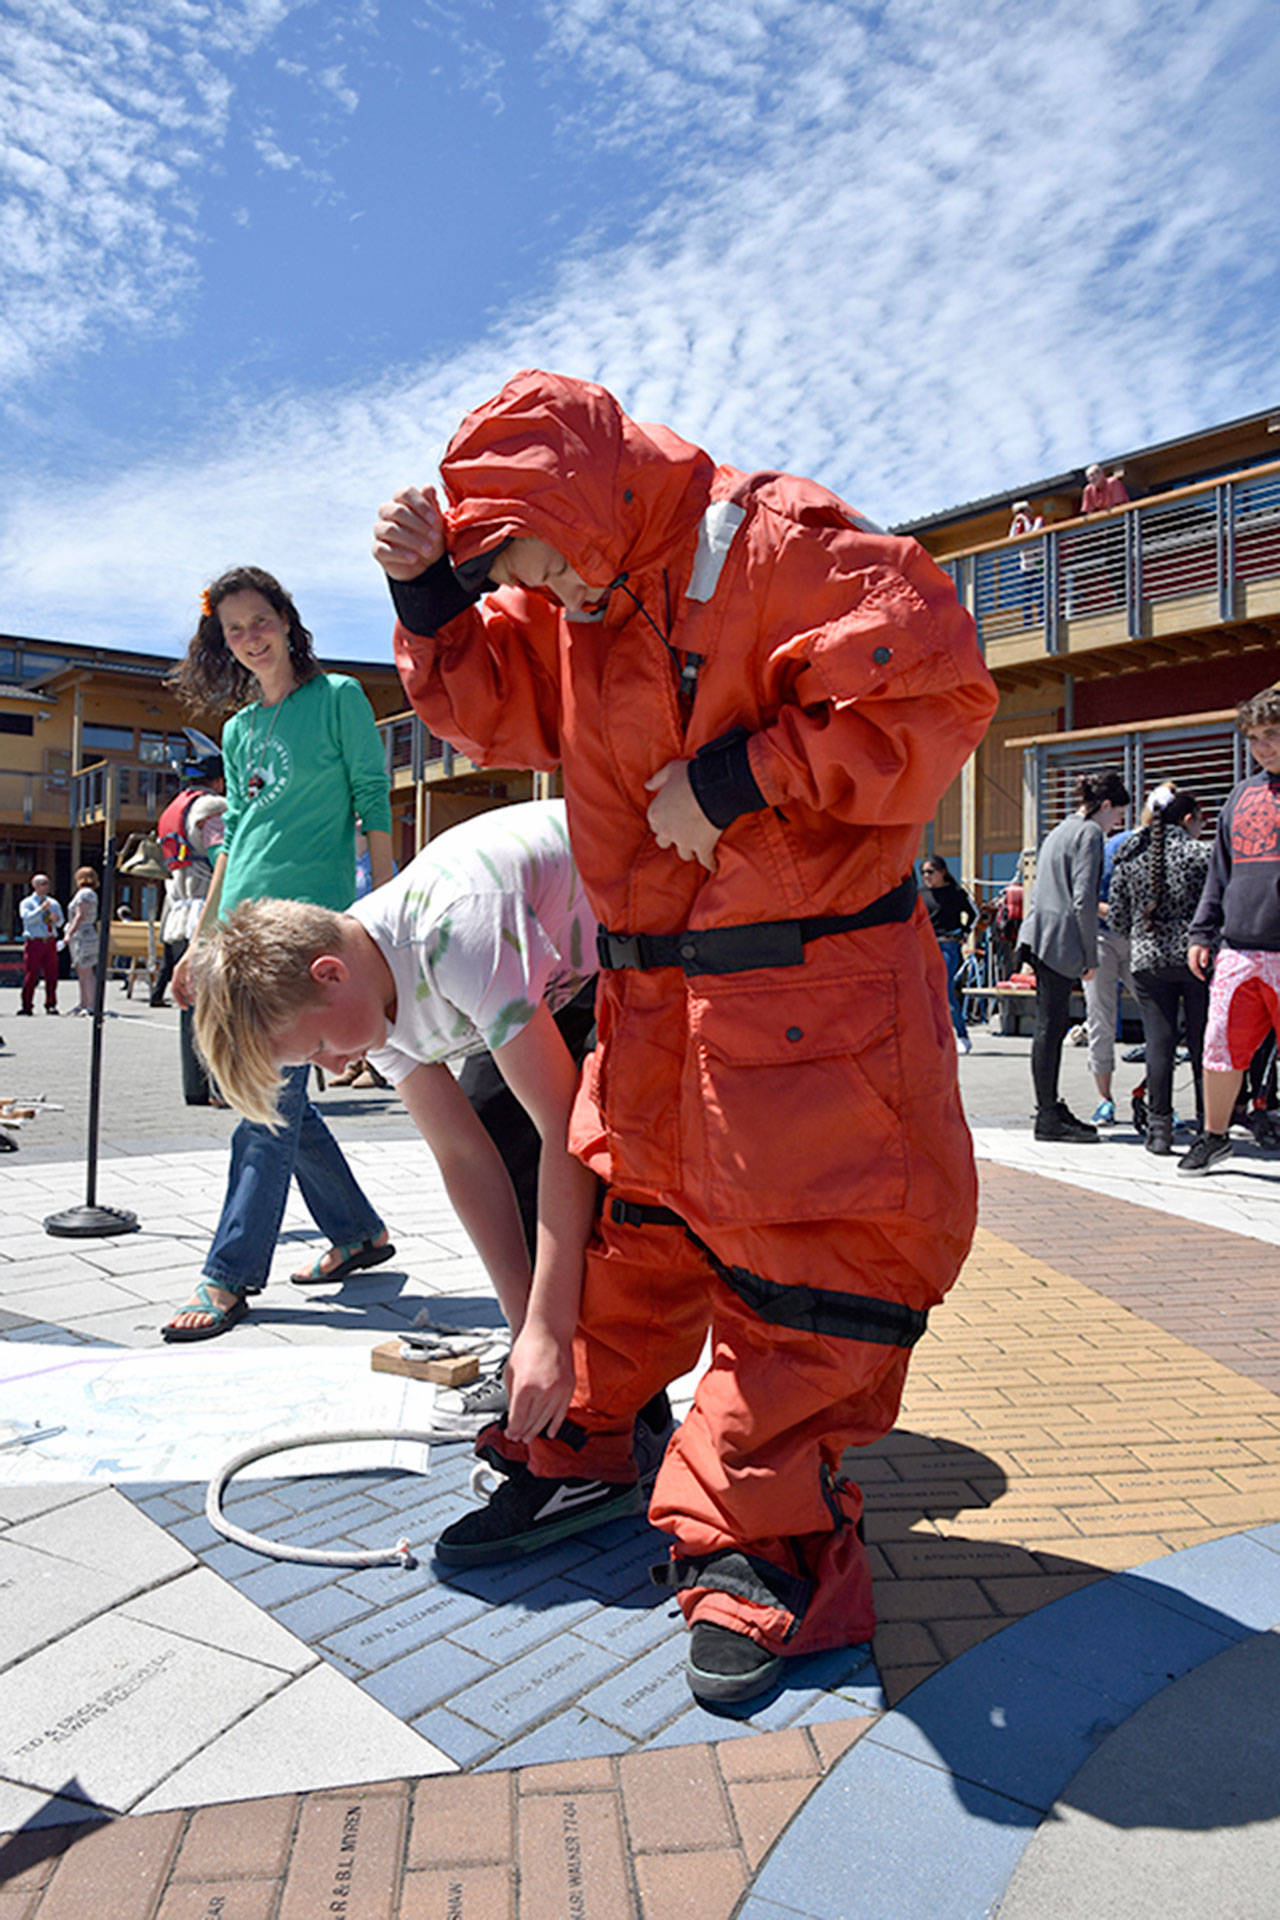 A maritime-themed relay race with exposure suits was part of the final-day celebration of the Blue Heron Maritime Discovery Program in 2016.